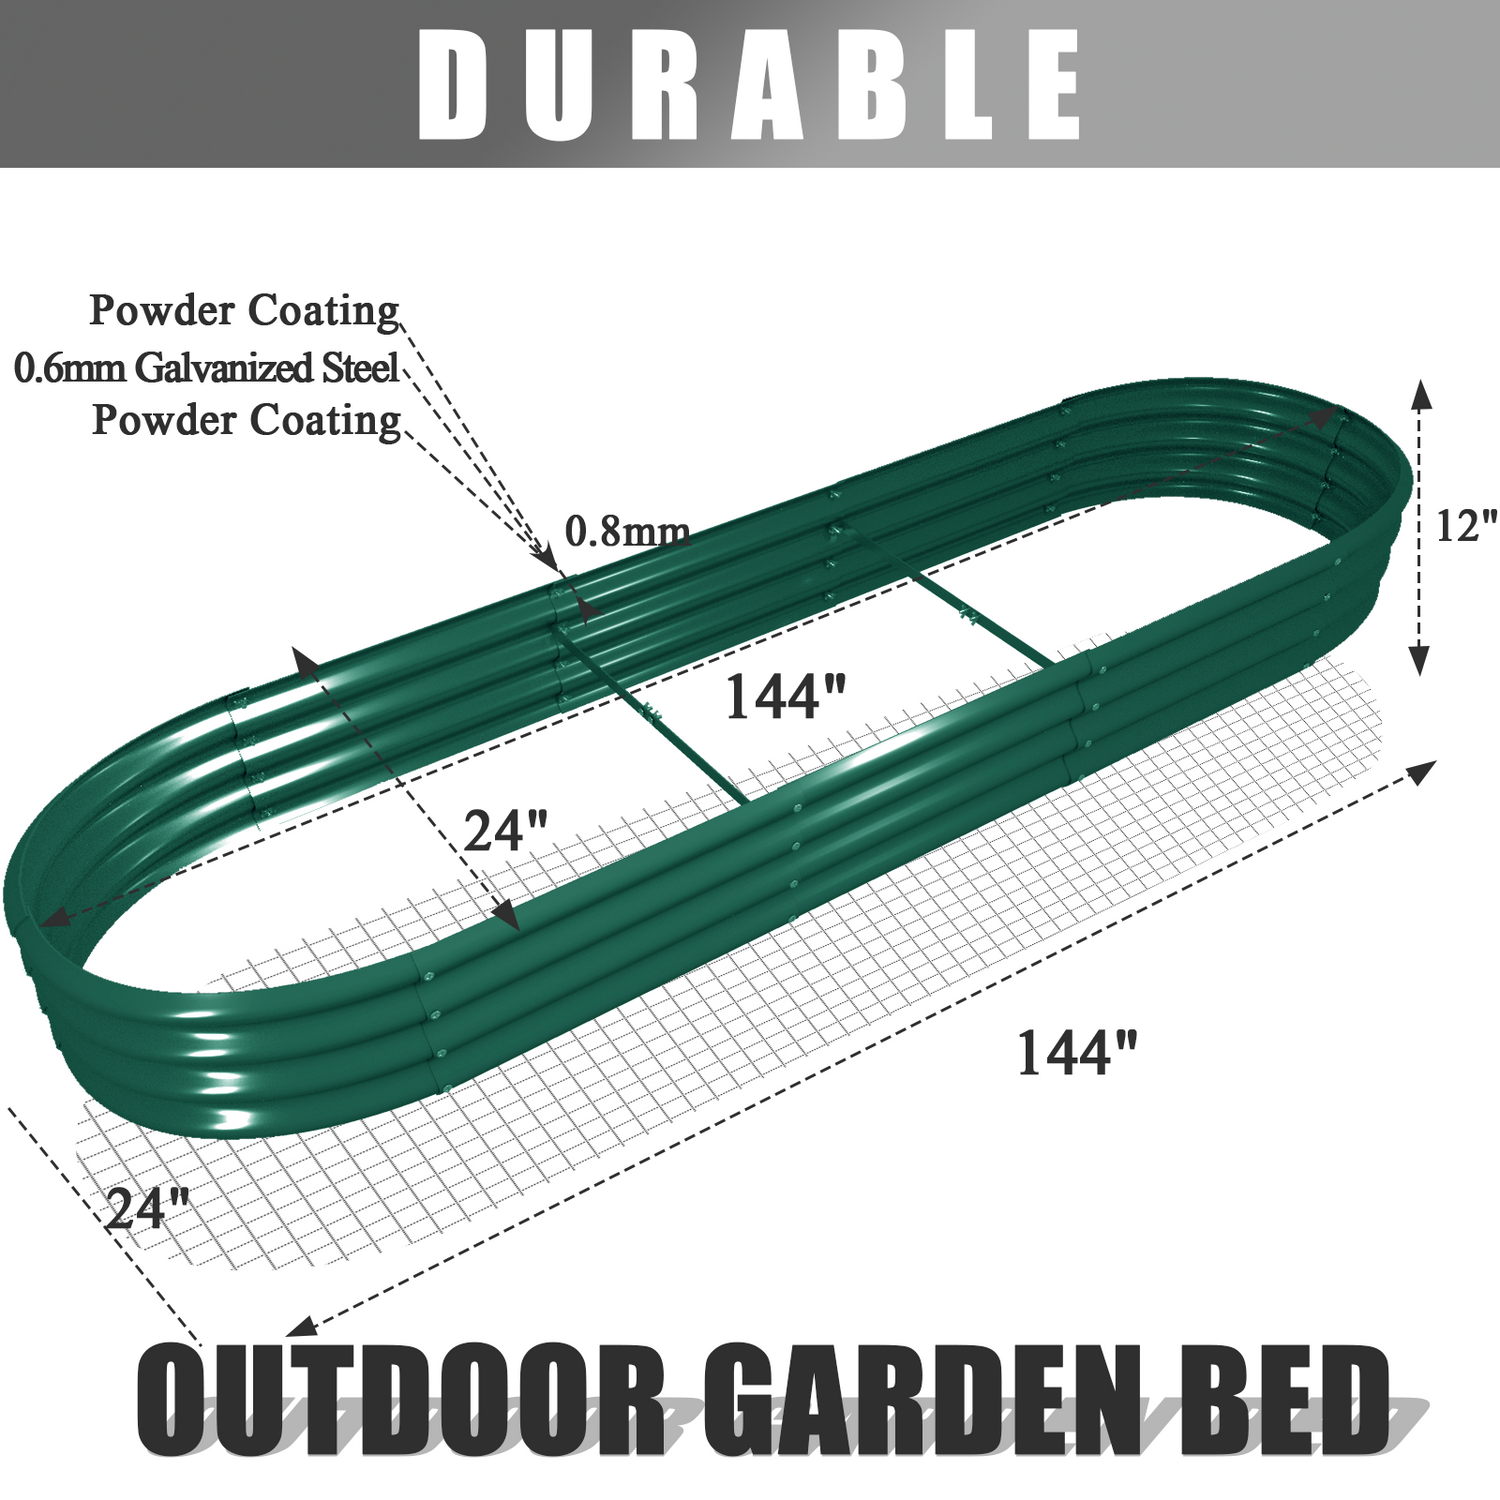 Bundle of 6 | 12" Tall 12x2ft Oval Metal Raised Garden Bed in Green with Gopher Wire Mesh